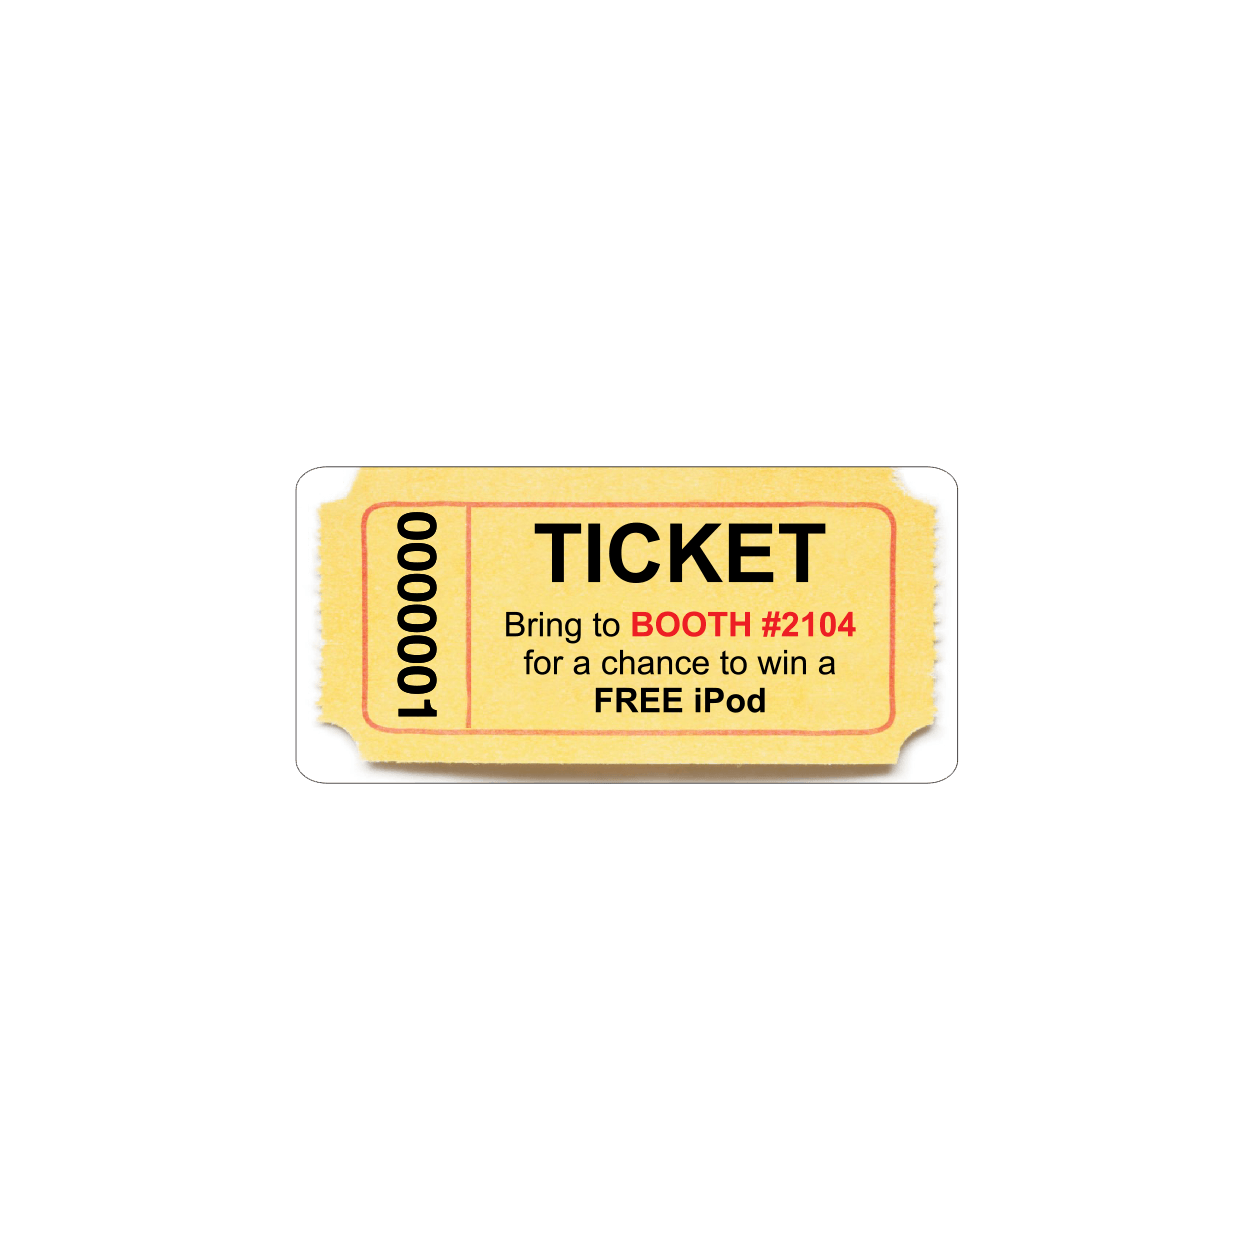 Ticket Key Tag Section